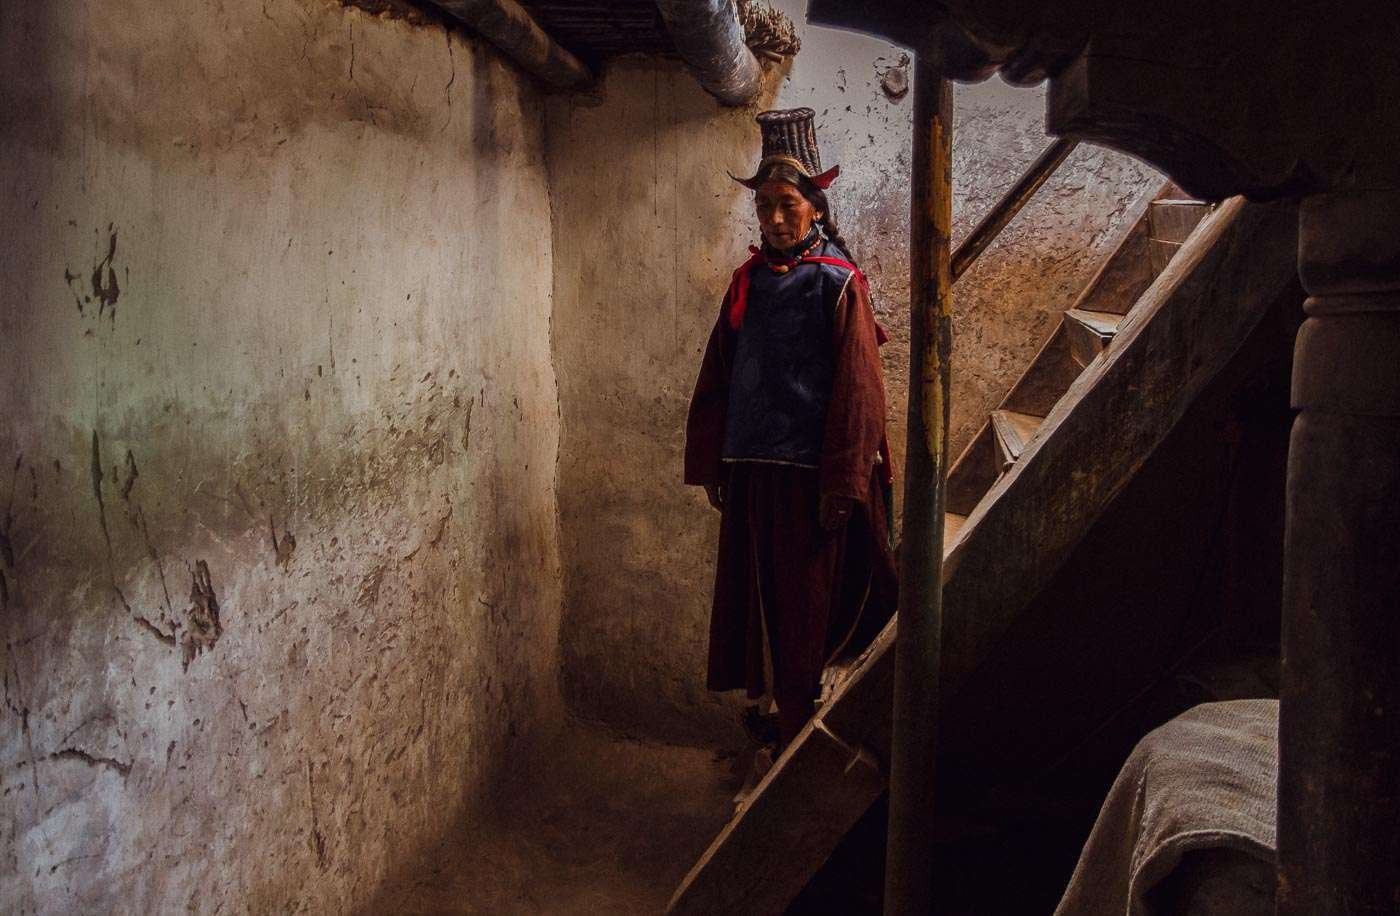 A Ladakhi woman pauses on the stairs at home.